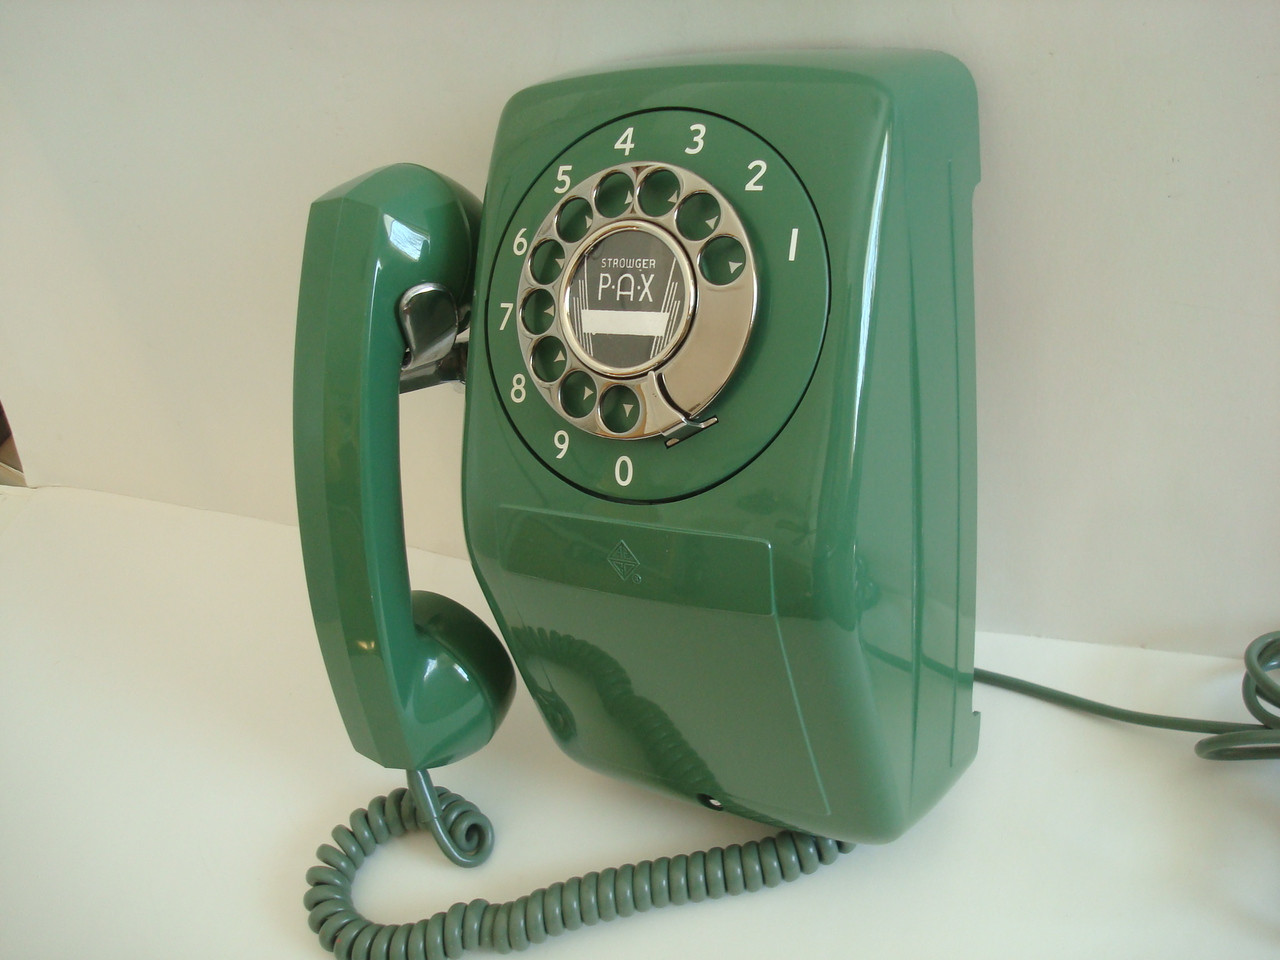 Download Vintage wall telephone made by Automatic Electric AE90 | Old Phone Shop